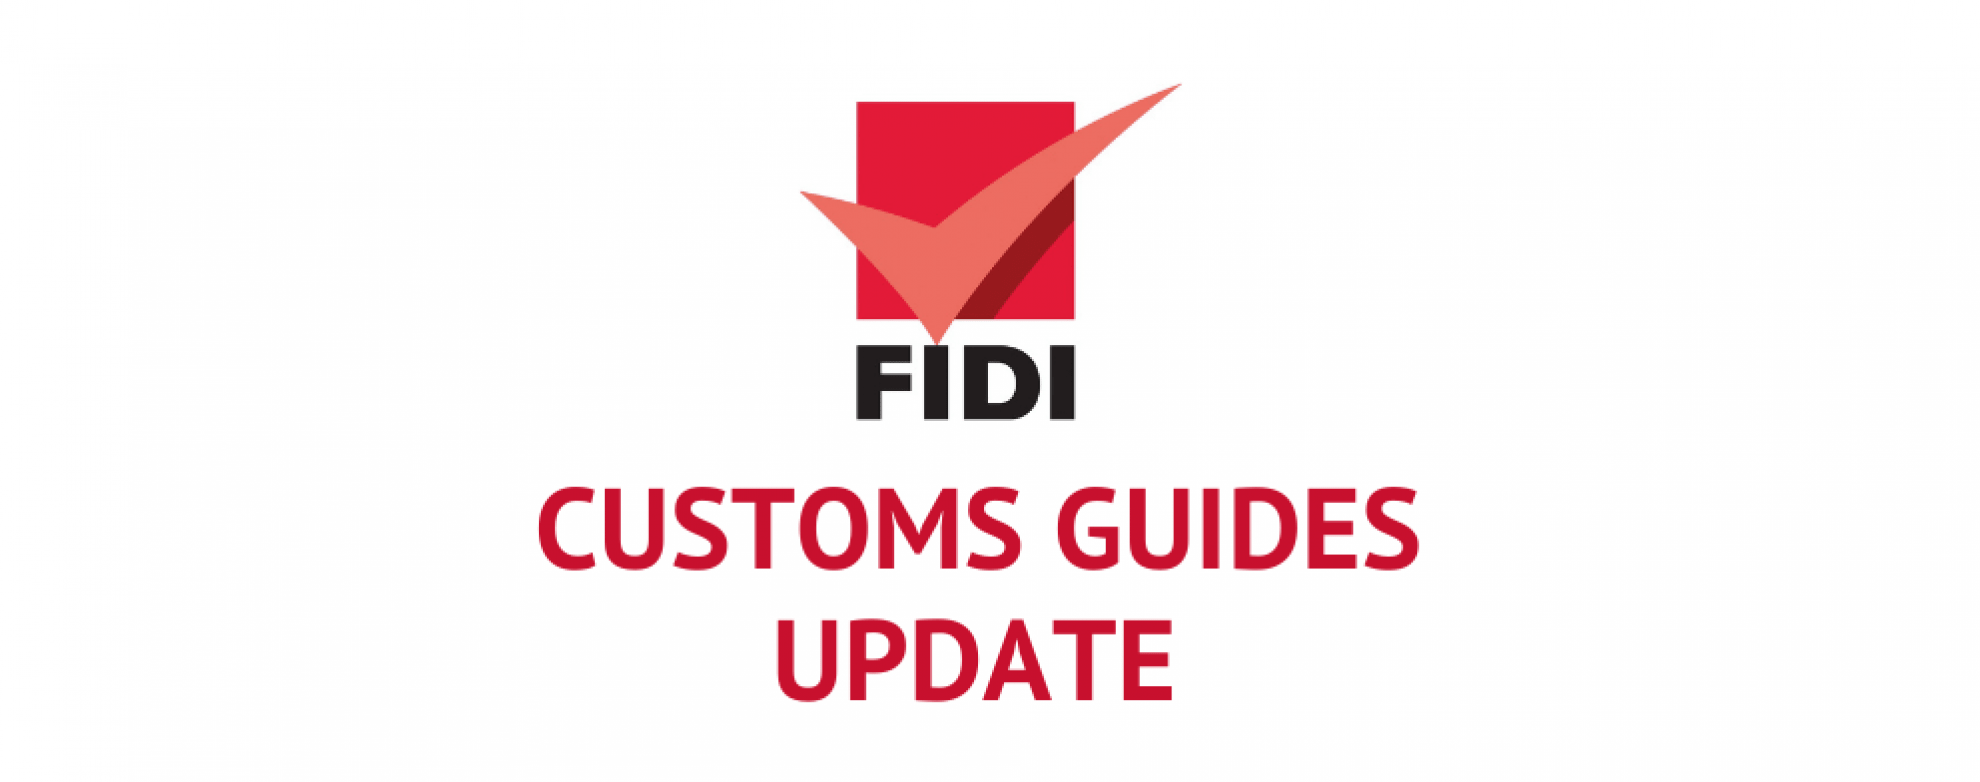 Albania, Bulgaria, Greece, Macedonia, Turkey, United Arab Emirates and USA's customs guides have been updated